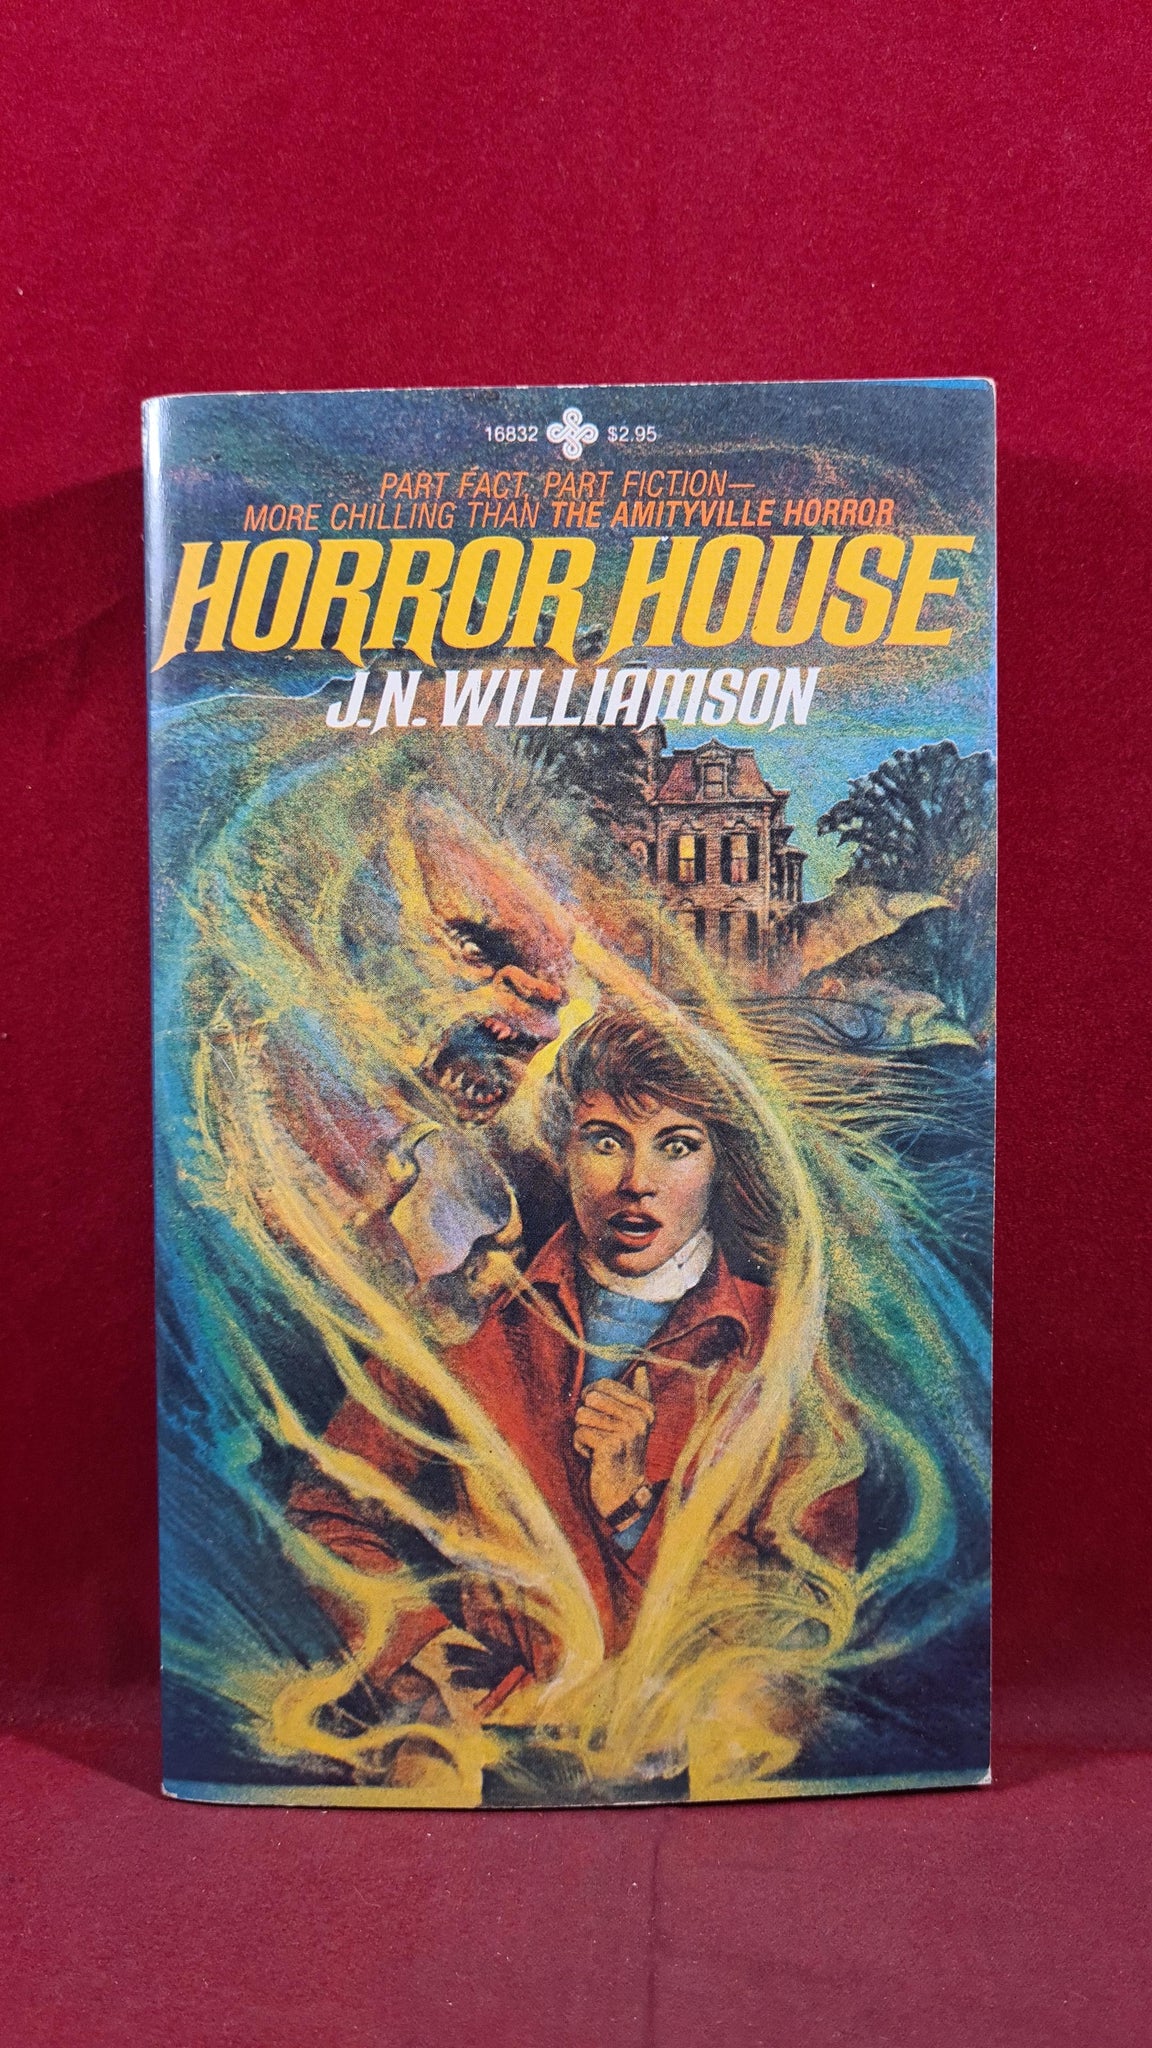 The Evil One by J.N. Williamson